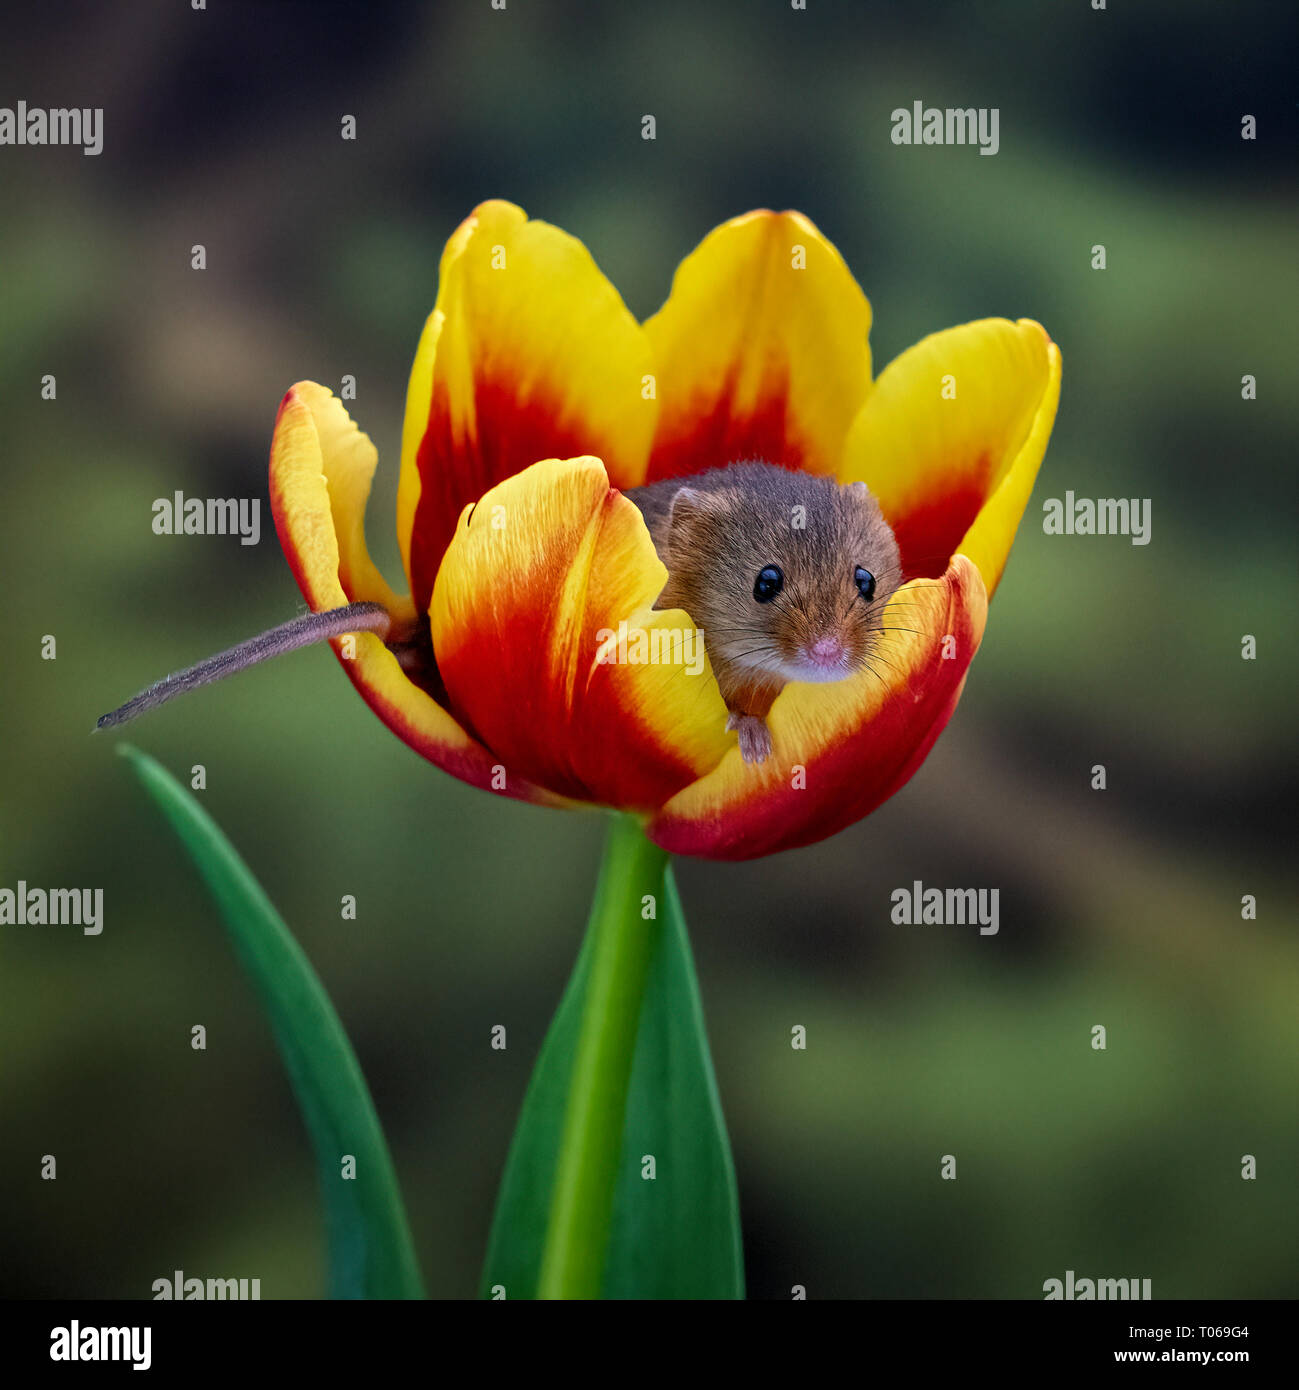 Harvest Mouse (Micromys minutus) inside a yellow red Tulip Stock Photo